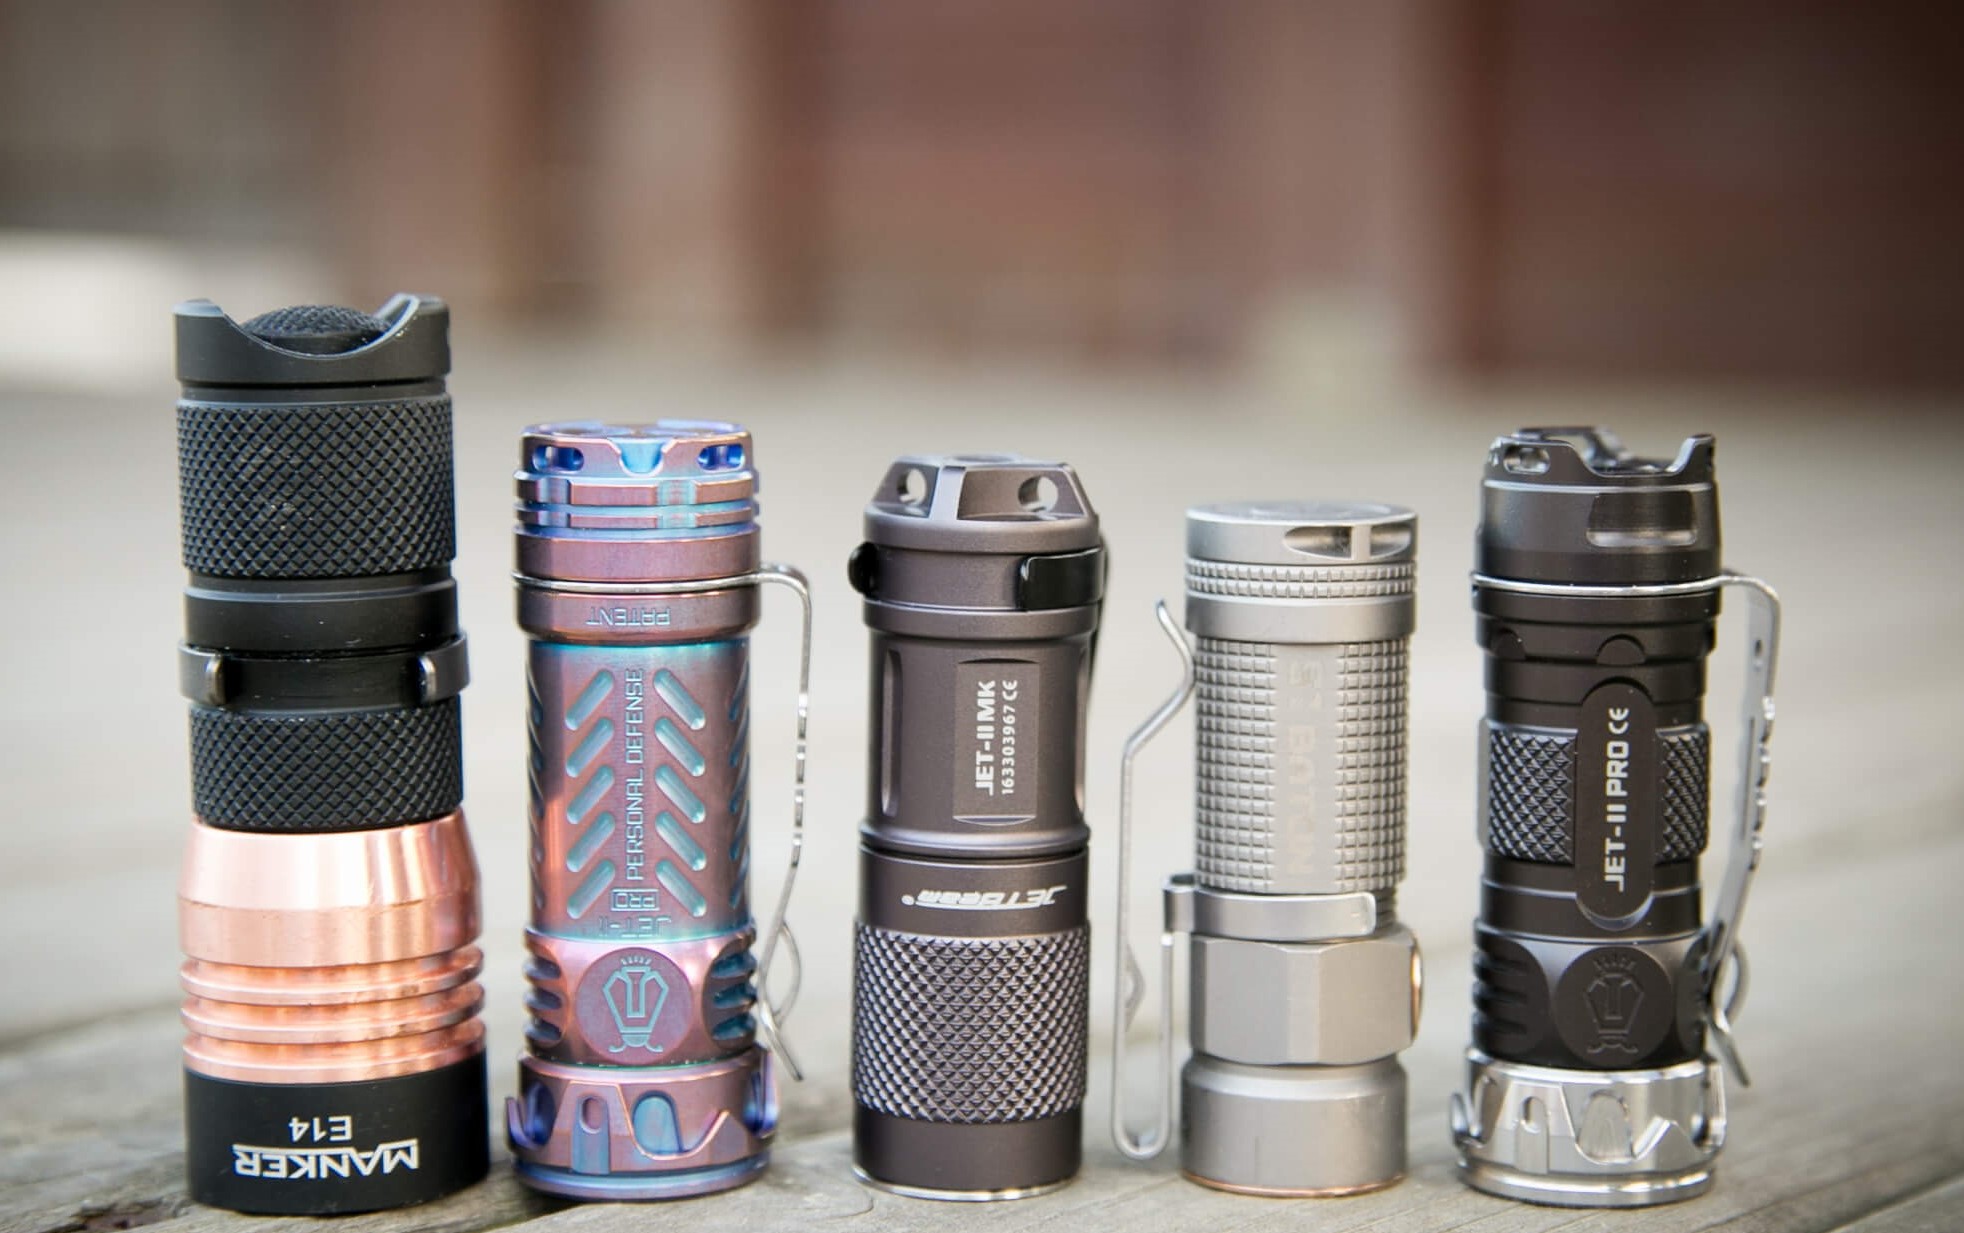 JETBeam Different types of Flashlight and Torches